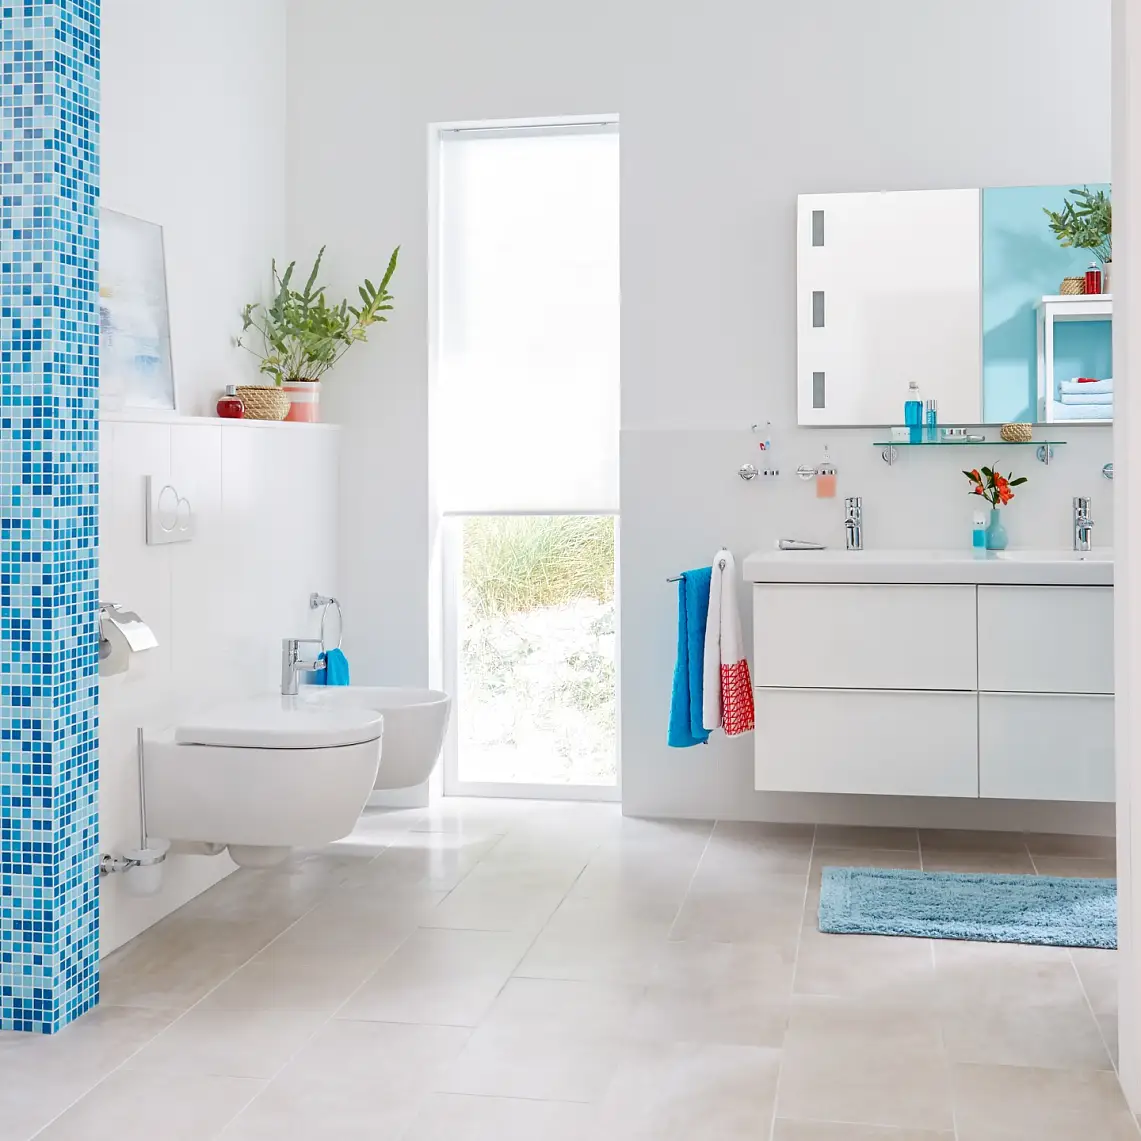 Give your bathroom a touch of simplicity with practical design.